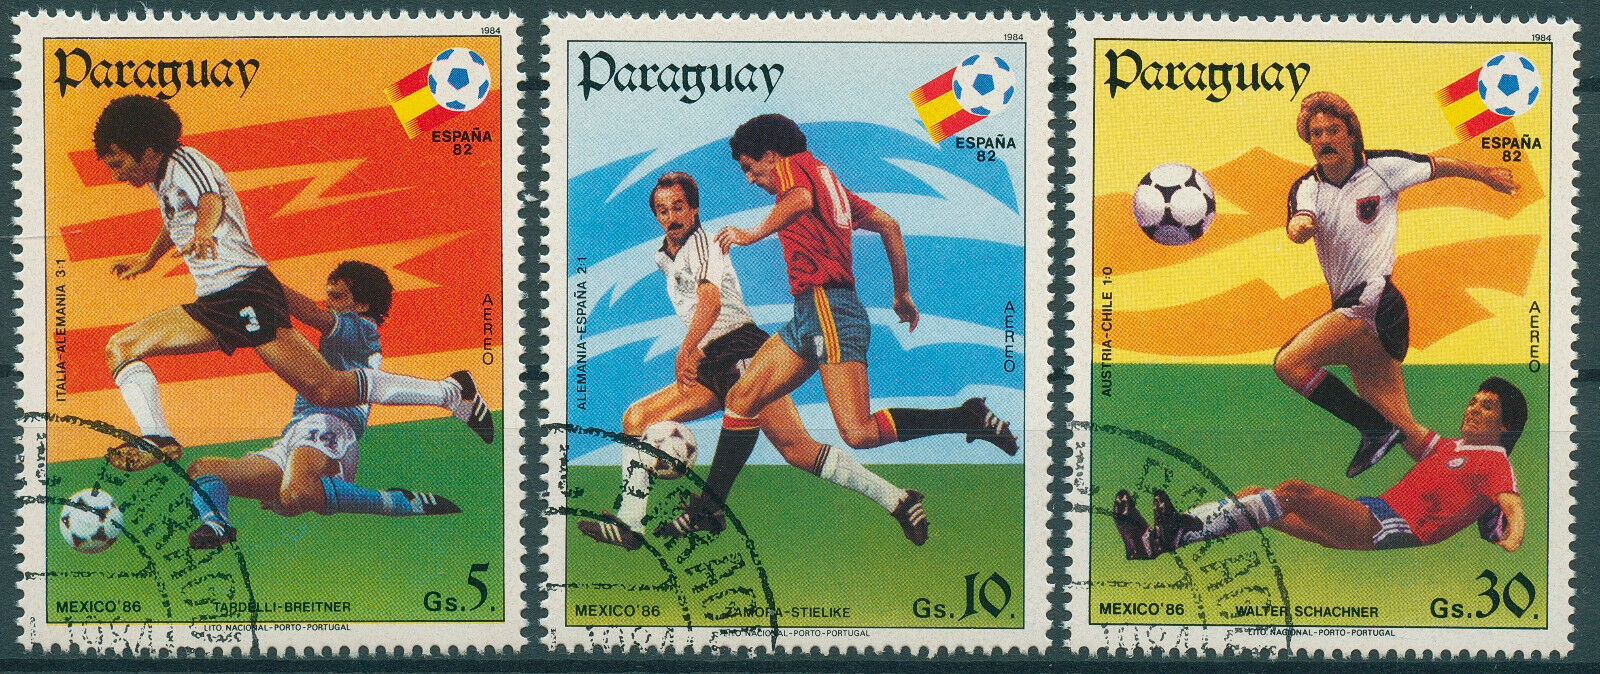 Paraguay 1984 CTO Sports Stamps Football World Cup Spain '82 Soccer 3v Set